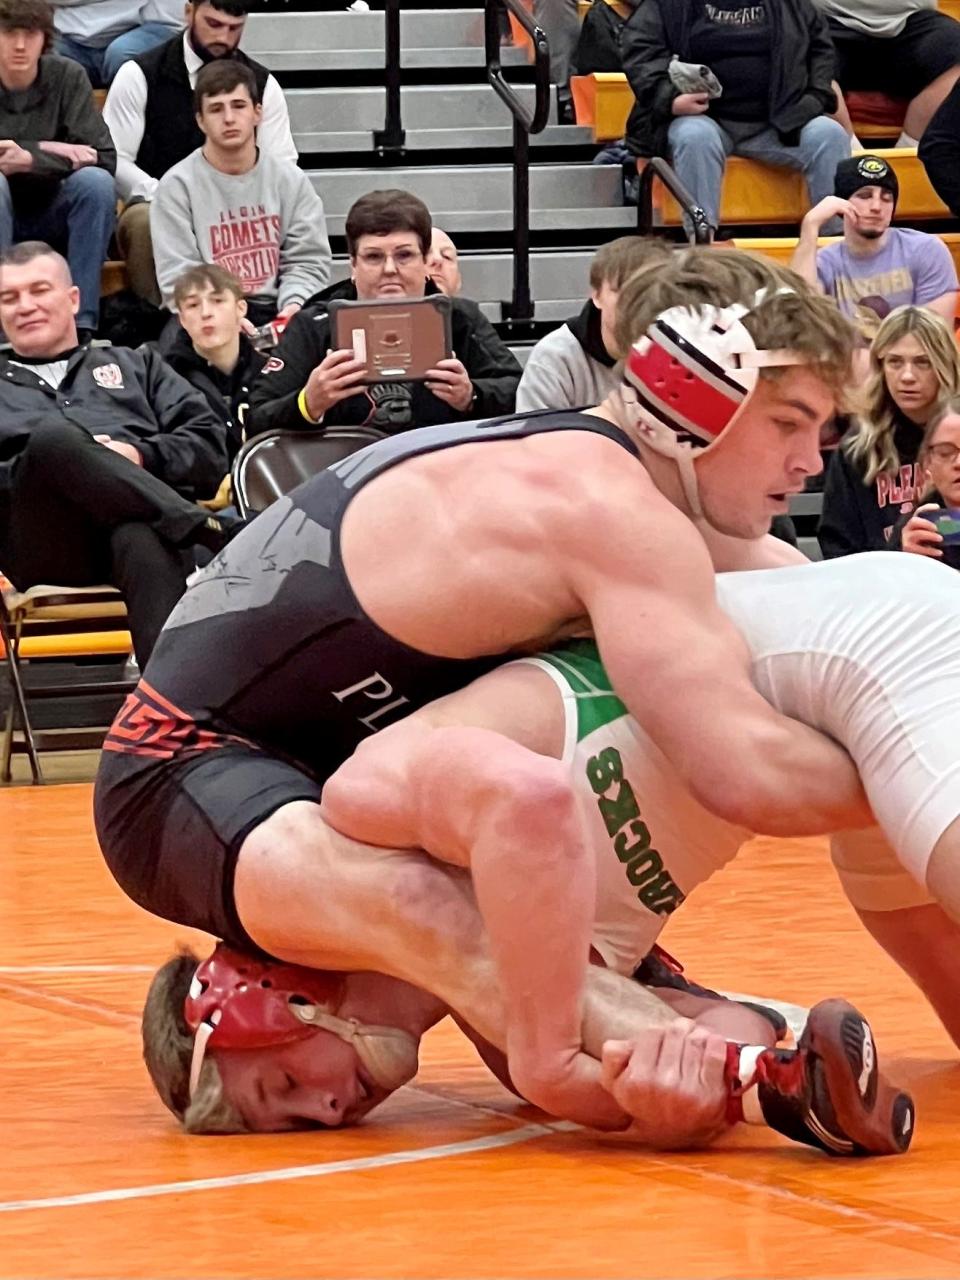 Pleasant's Daxton Chase ties up Barnesville's Reese Stephen in the 150-pound title match at the Division III boys wrestling district tournament at Heath.